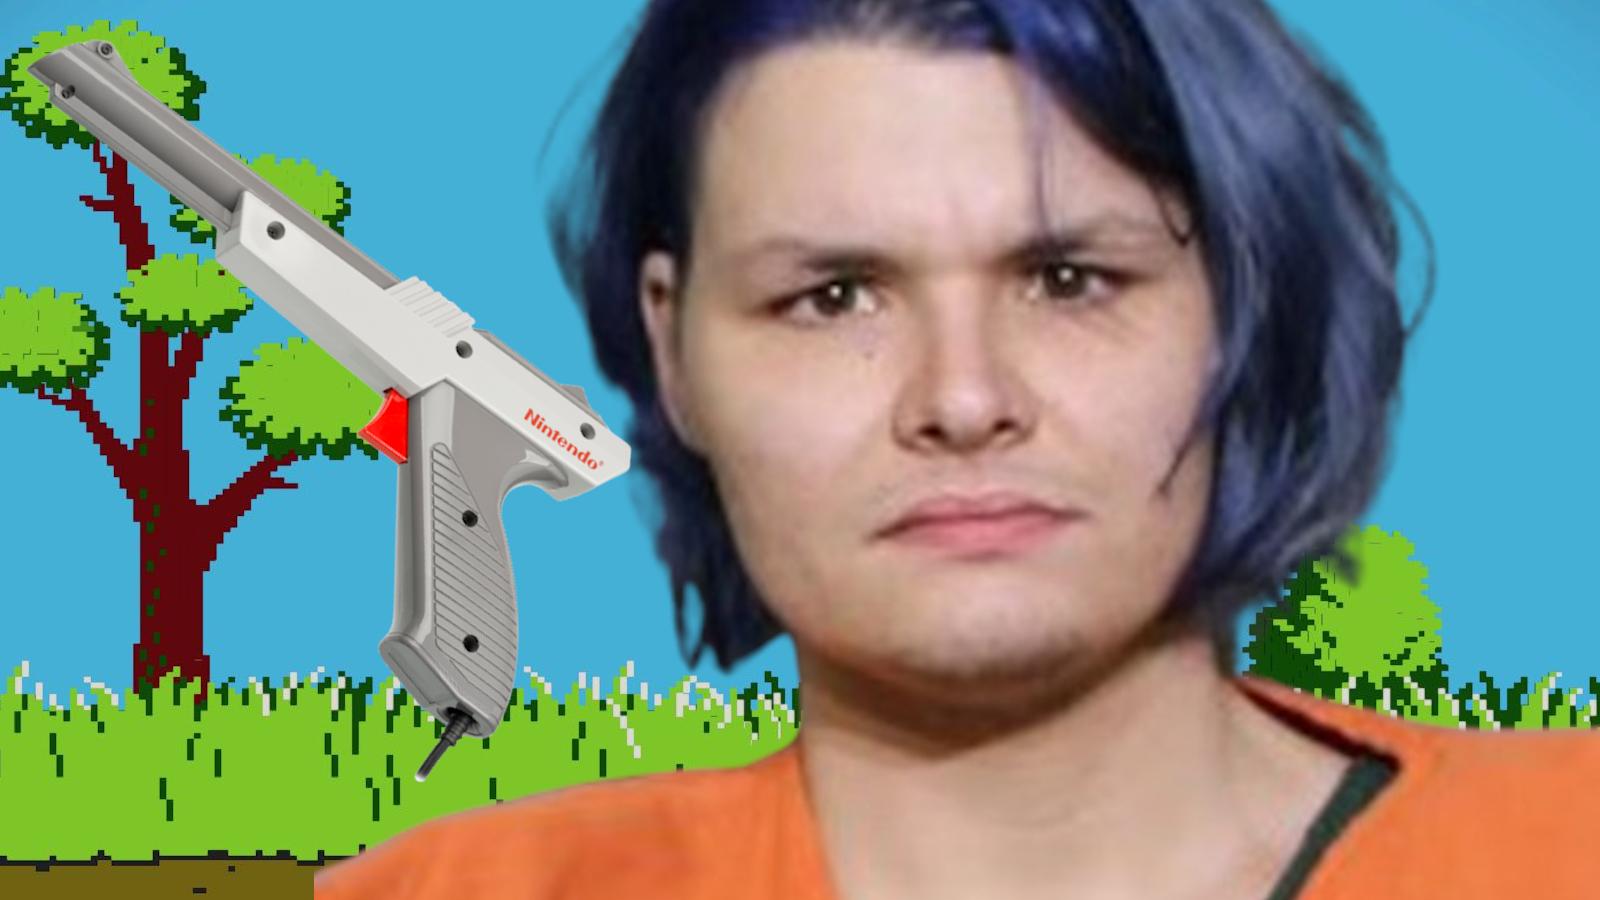 man arrested for robbing store with nes zapper